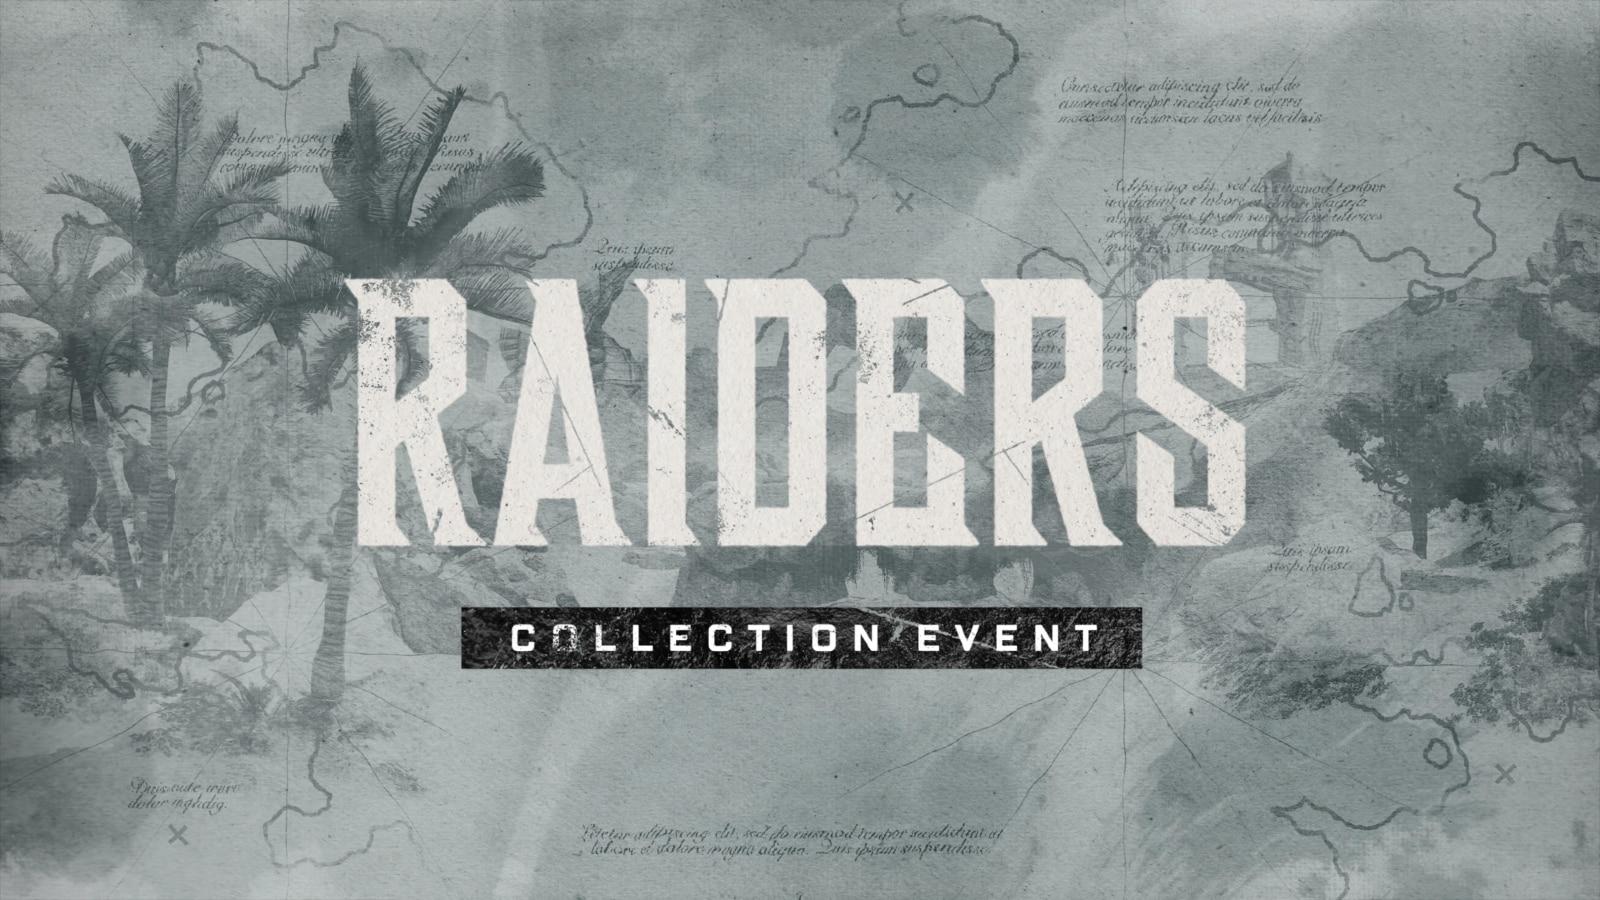 Title screen for the Raiders Collection Event in Apex Legends